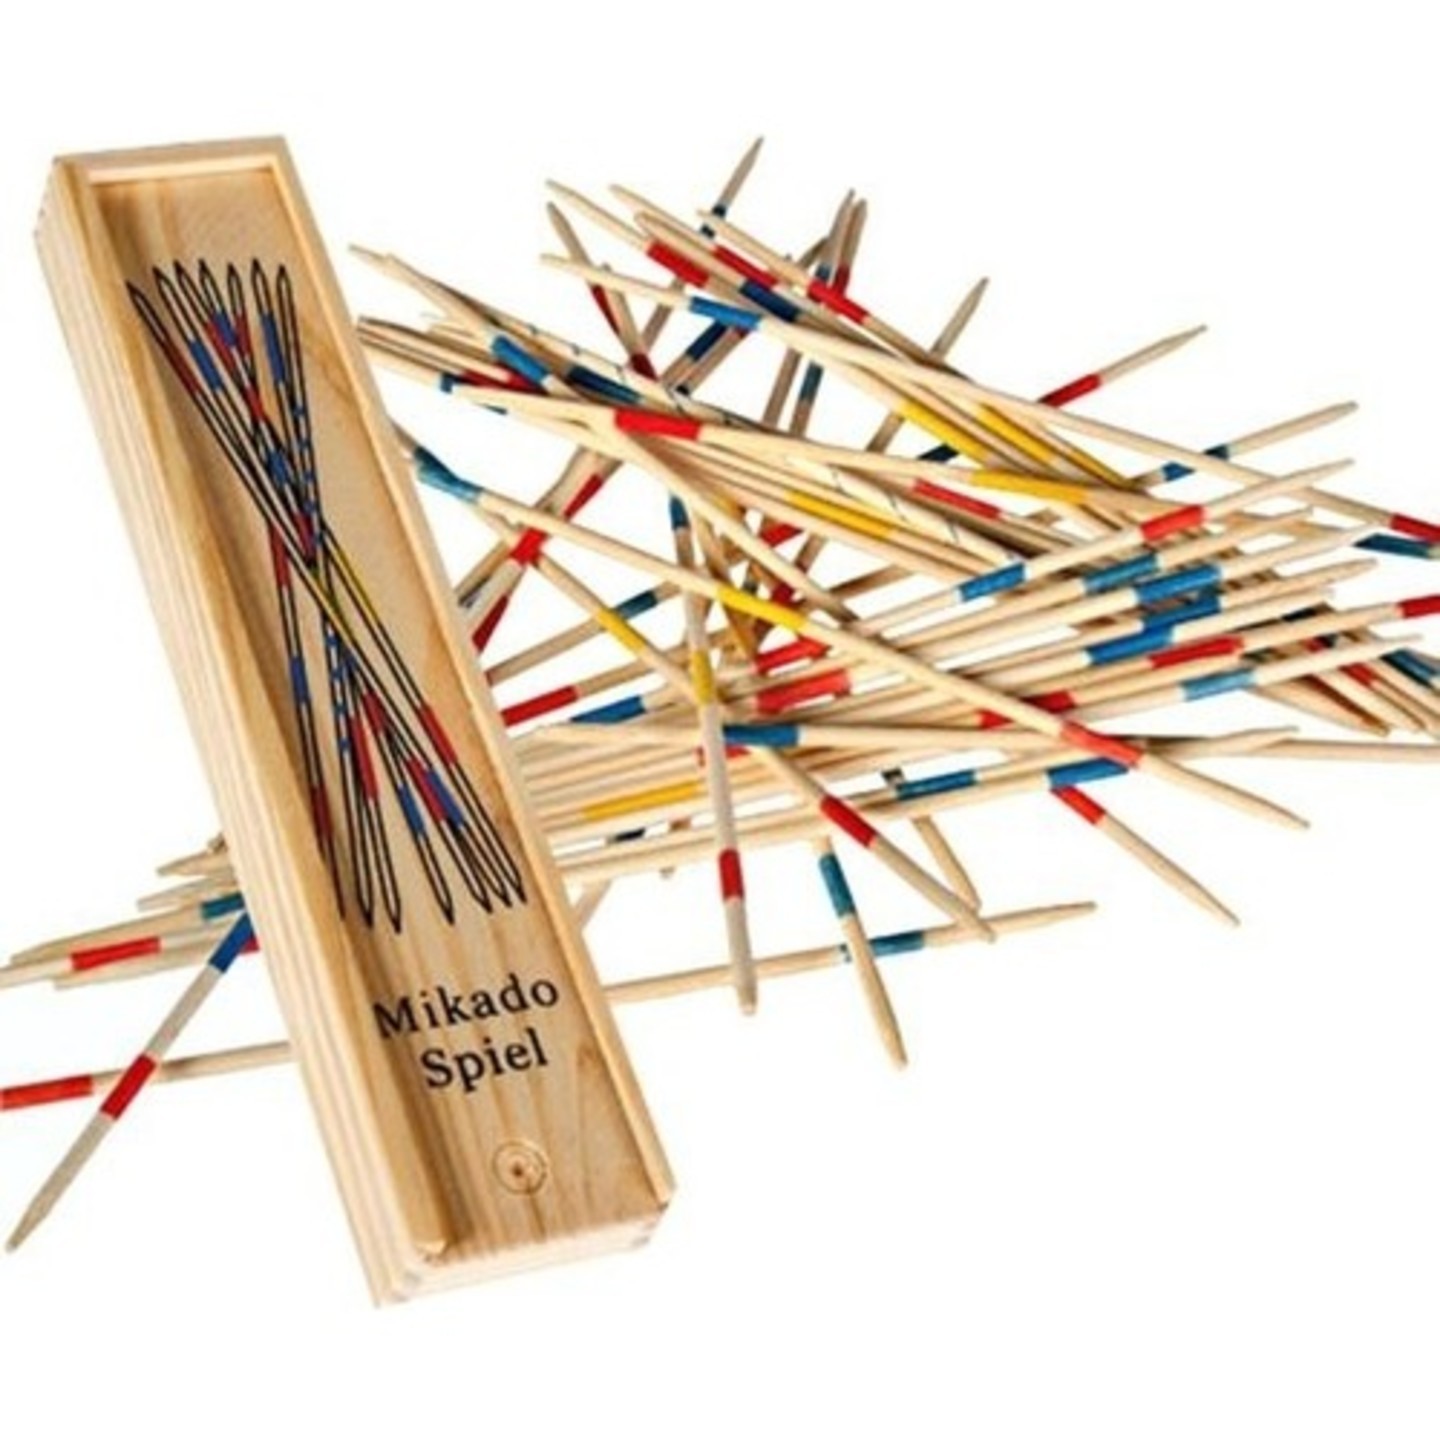 Educational Wooden Traditional Mikado Spiel Game Play N Learn  Wooden pick up stick game